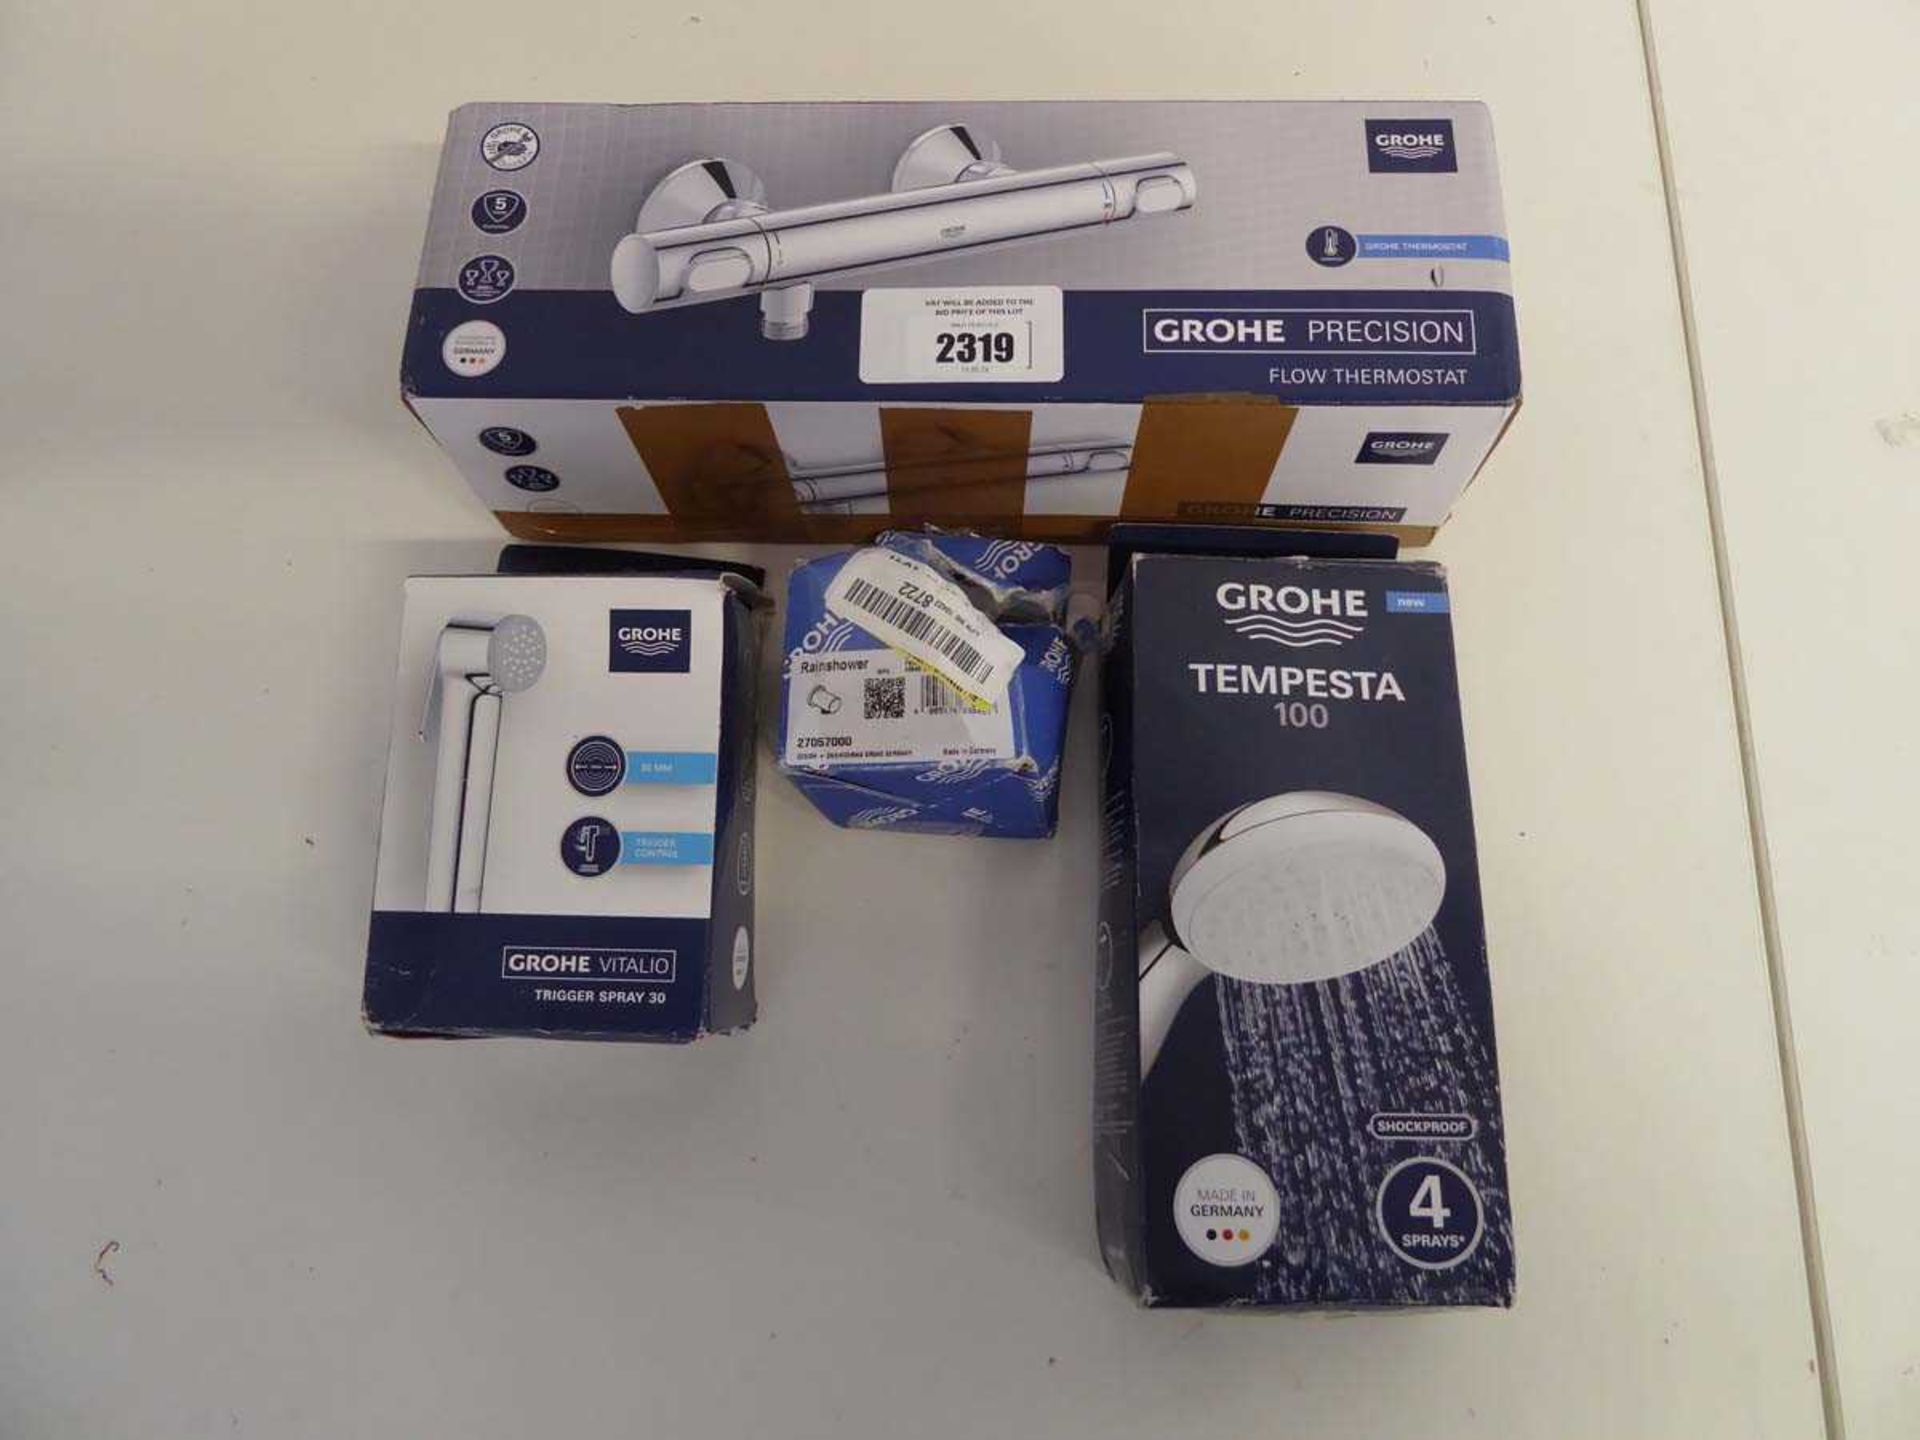 +VAT Boxed Grohe flow thermostat together with Tempesta 100 shower head, Grohe trigger spray and